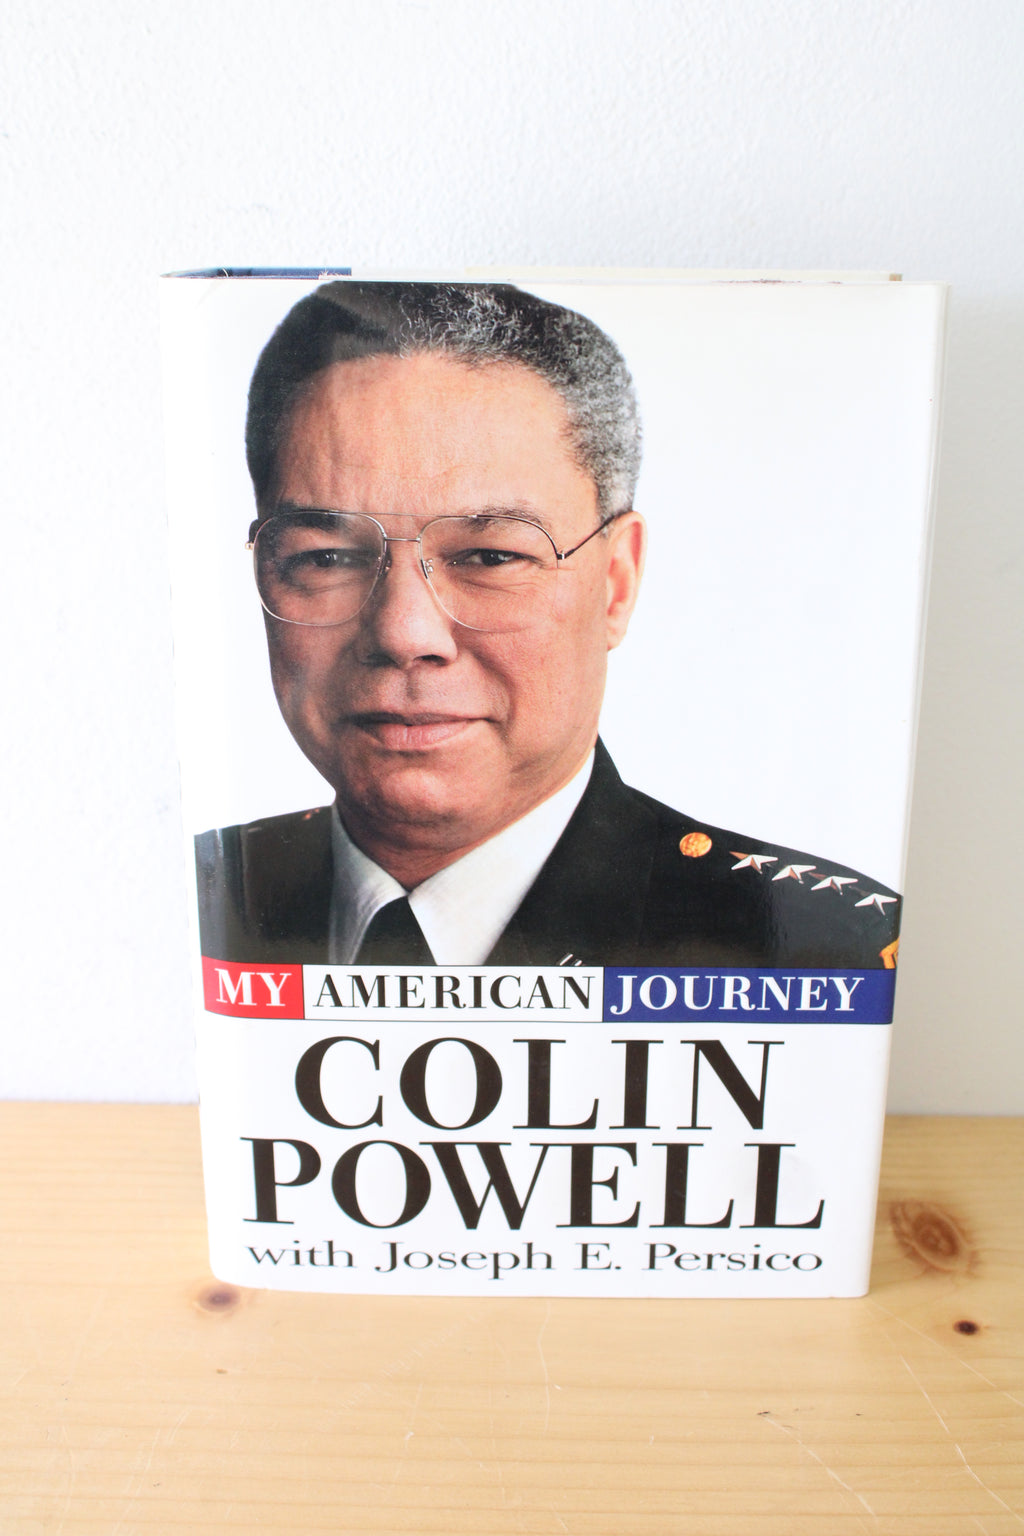 My American Journey: Colin Powell With Joseph E. Persico (Signed Copy)